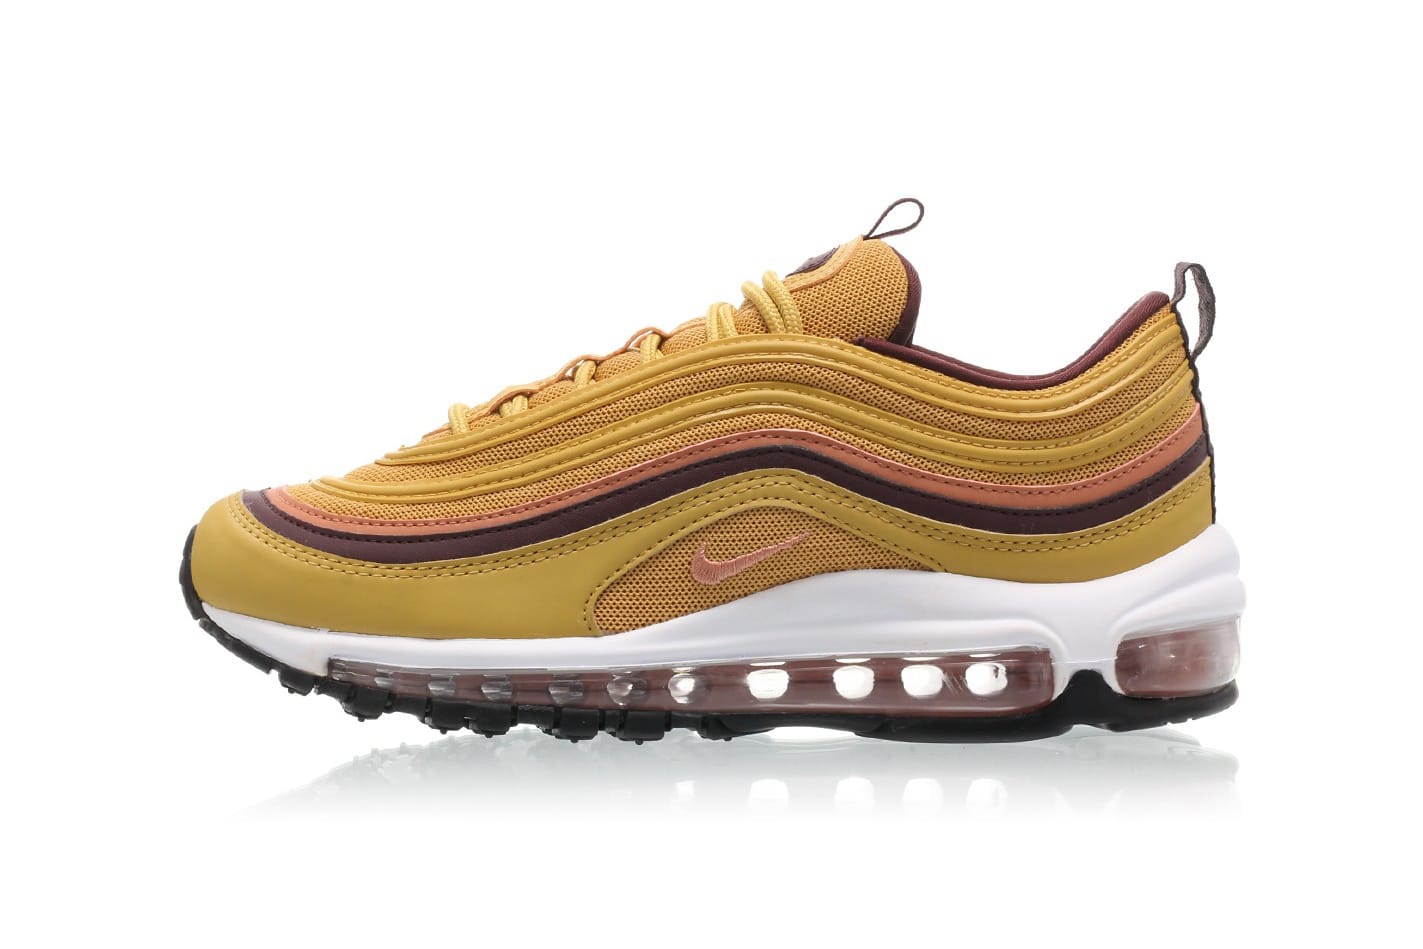 Nike Air Max 97 in Wheat Gold, Pink 